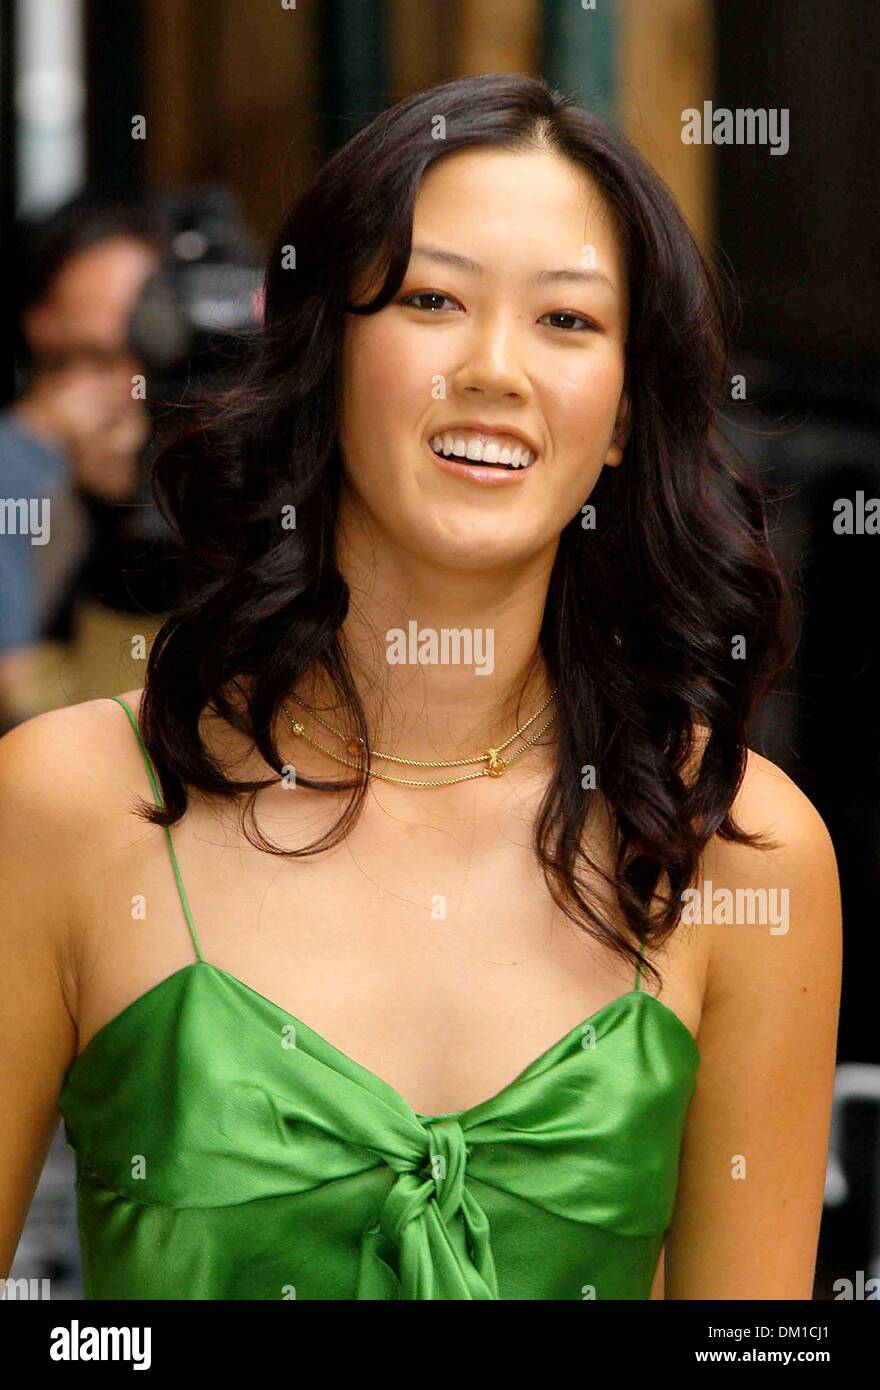 June 24, 2002 - K44414AR.CELEBRITIES LEAVING AFTER APPEARANCE ON THE '' LATE SHOW WITH DAVID LETTERMAN '' AT THE ED SULLIVAN THEATRE , NEW YORK CITY 08-08-2005. ANDREA RENAULT-   MICHELLE WIE(Credit Image: © Globe Photos/ZUMAPRESS.com) Stock Photo